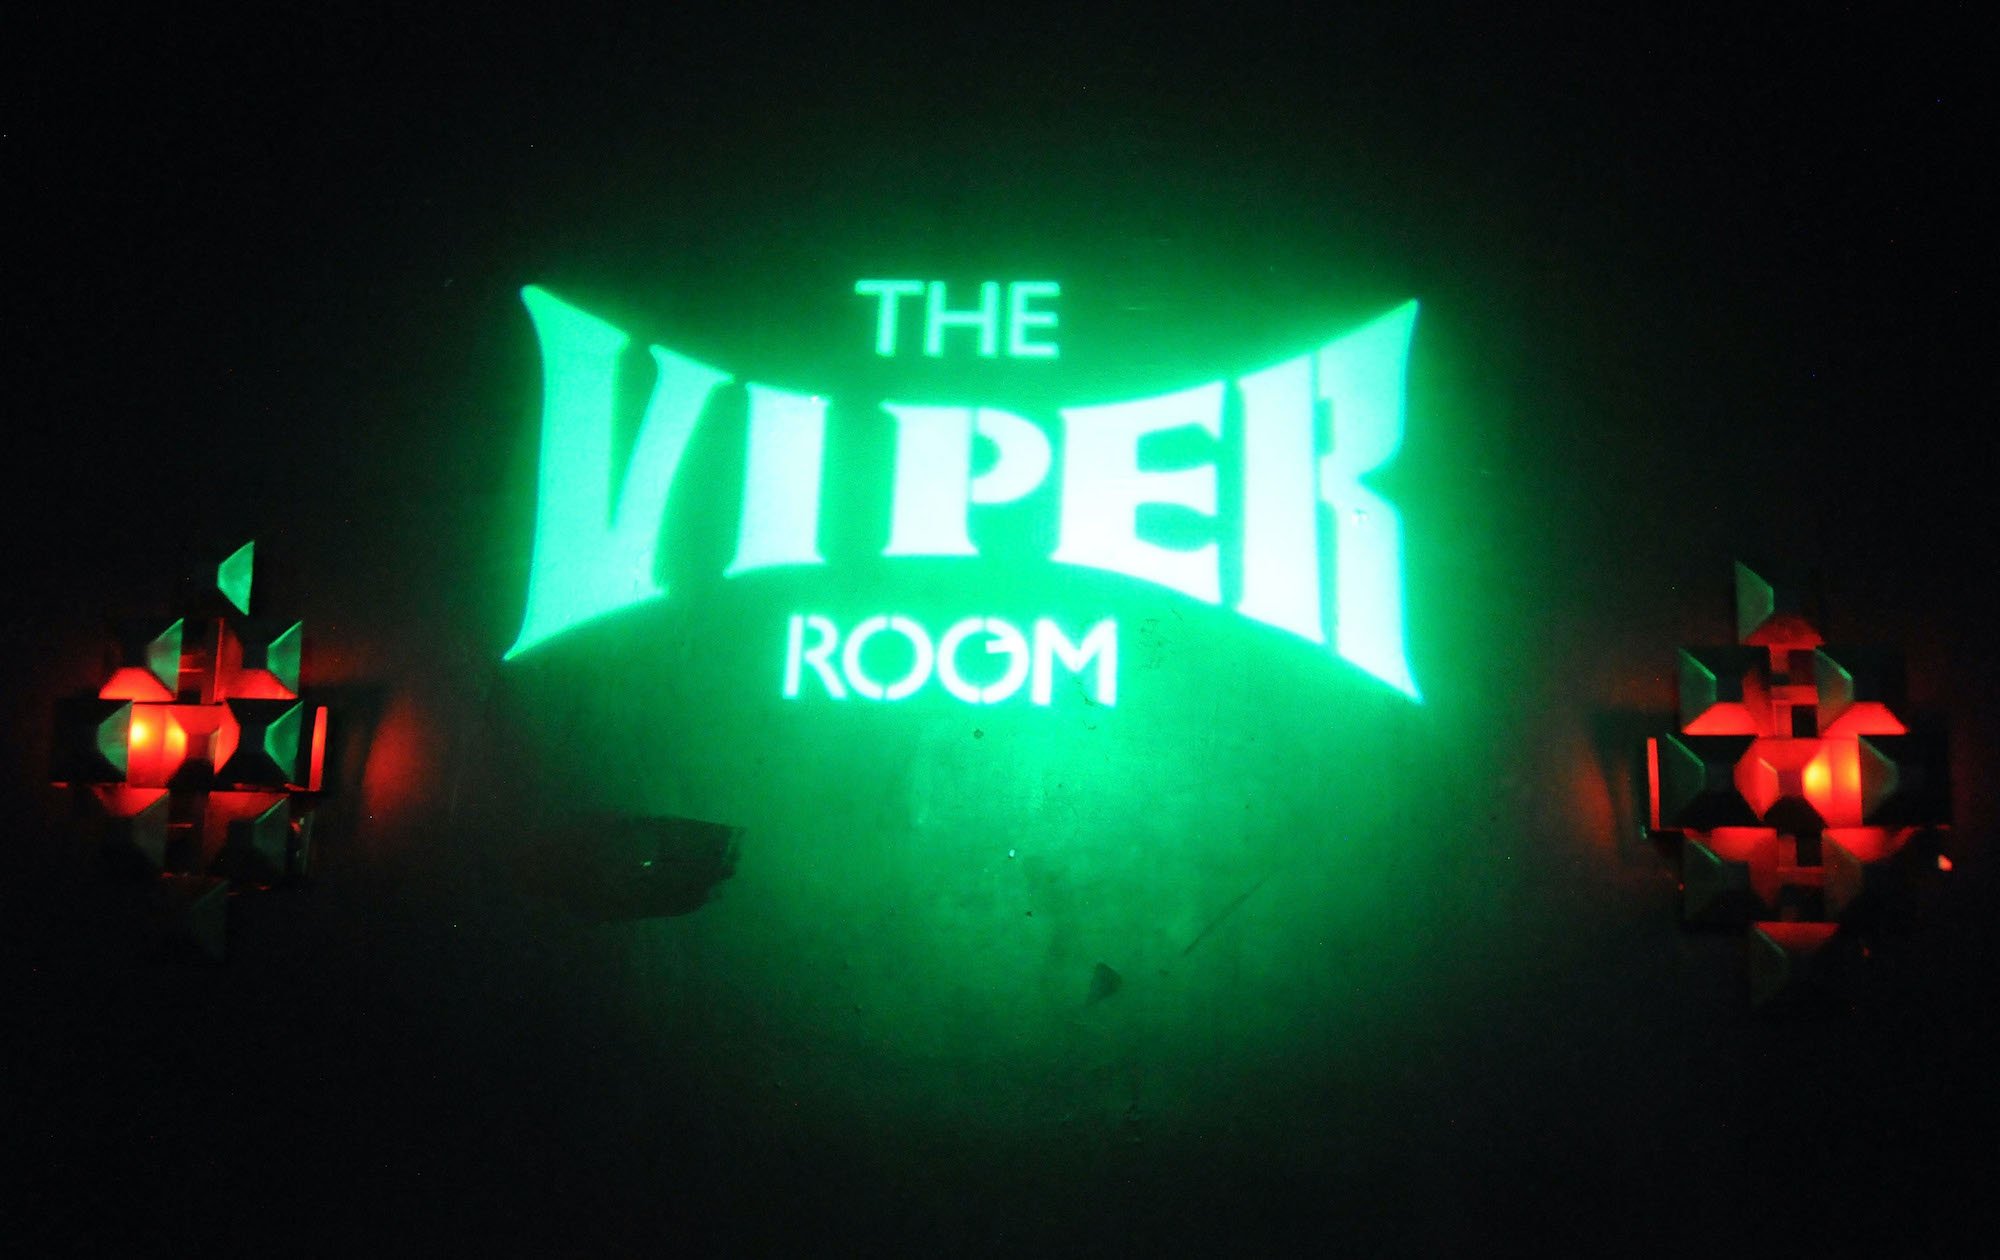 The Viper Room green neon sign lit in a dark room